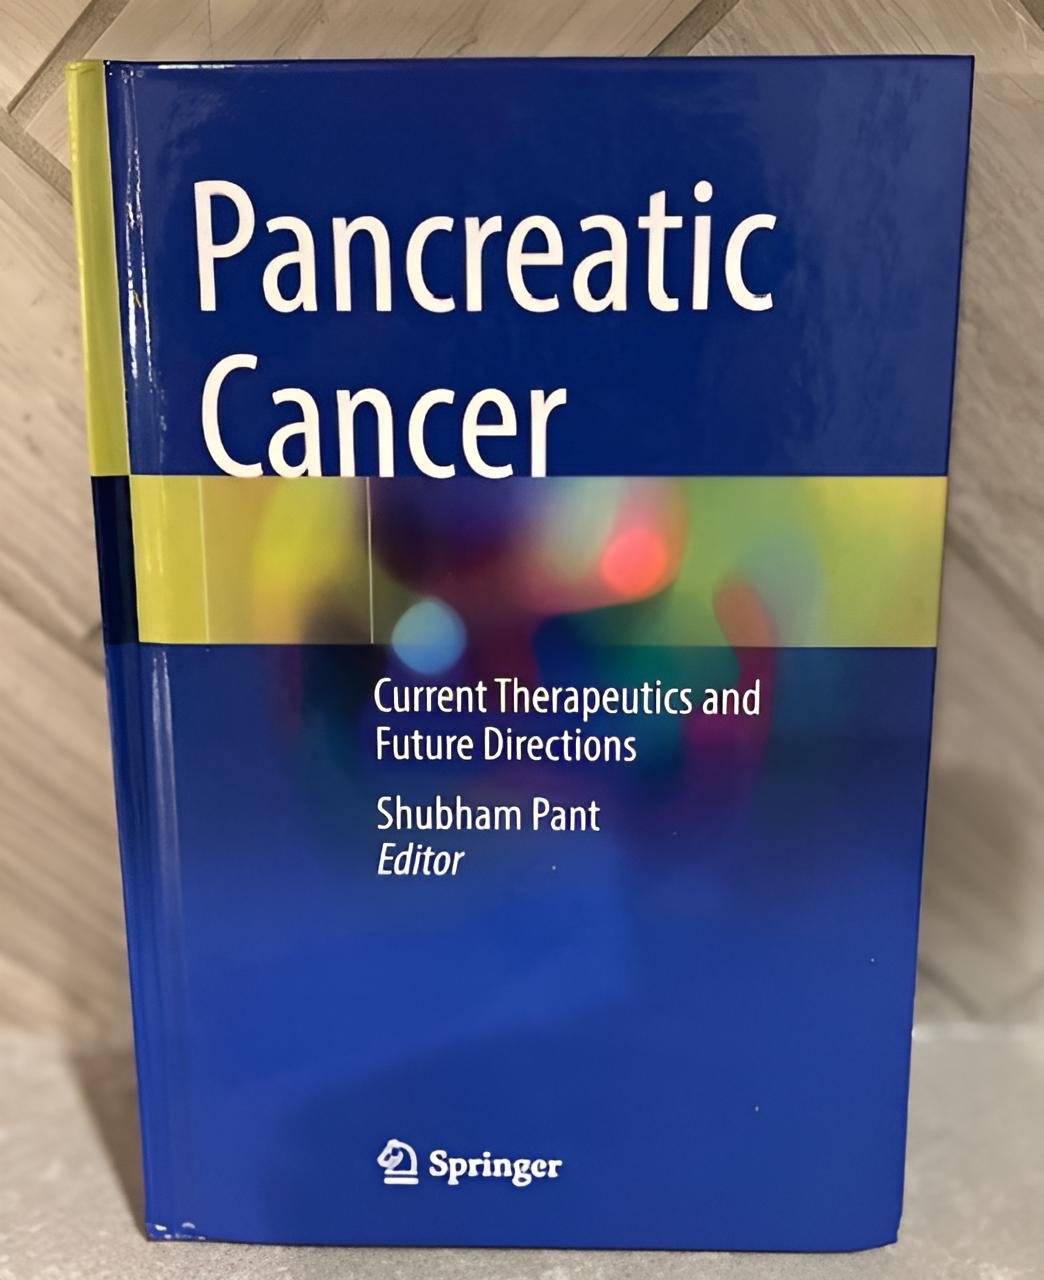 Shubham Pant: Honored to collaborate with amazing colleagues and experts in Pancreatic Cancer Globally